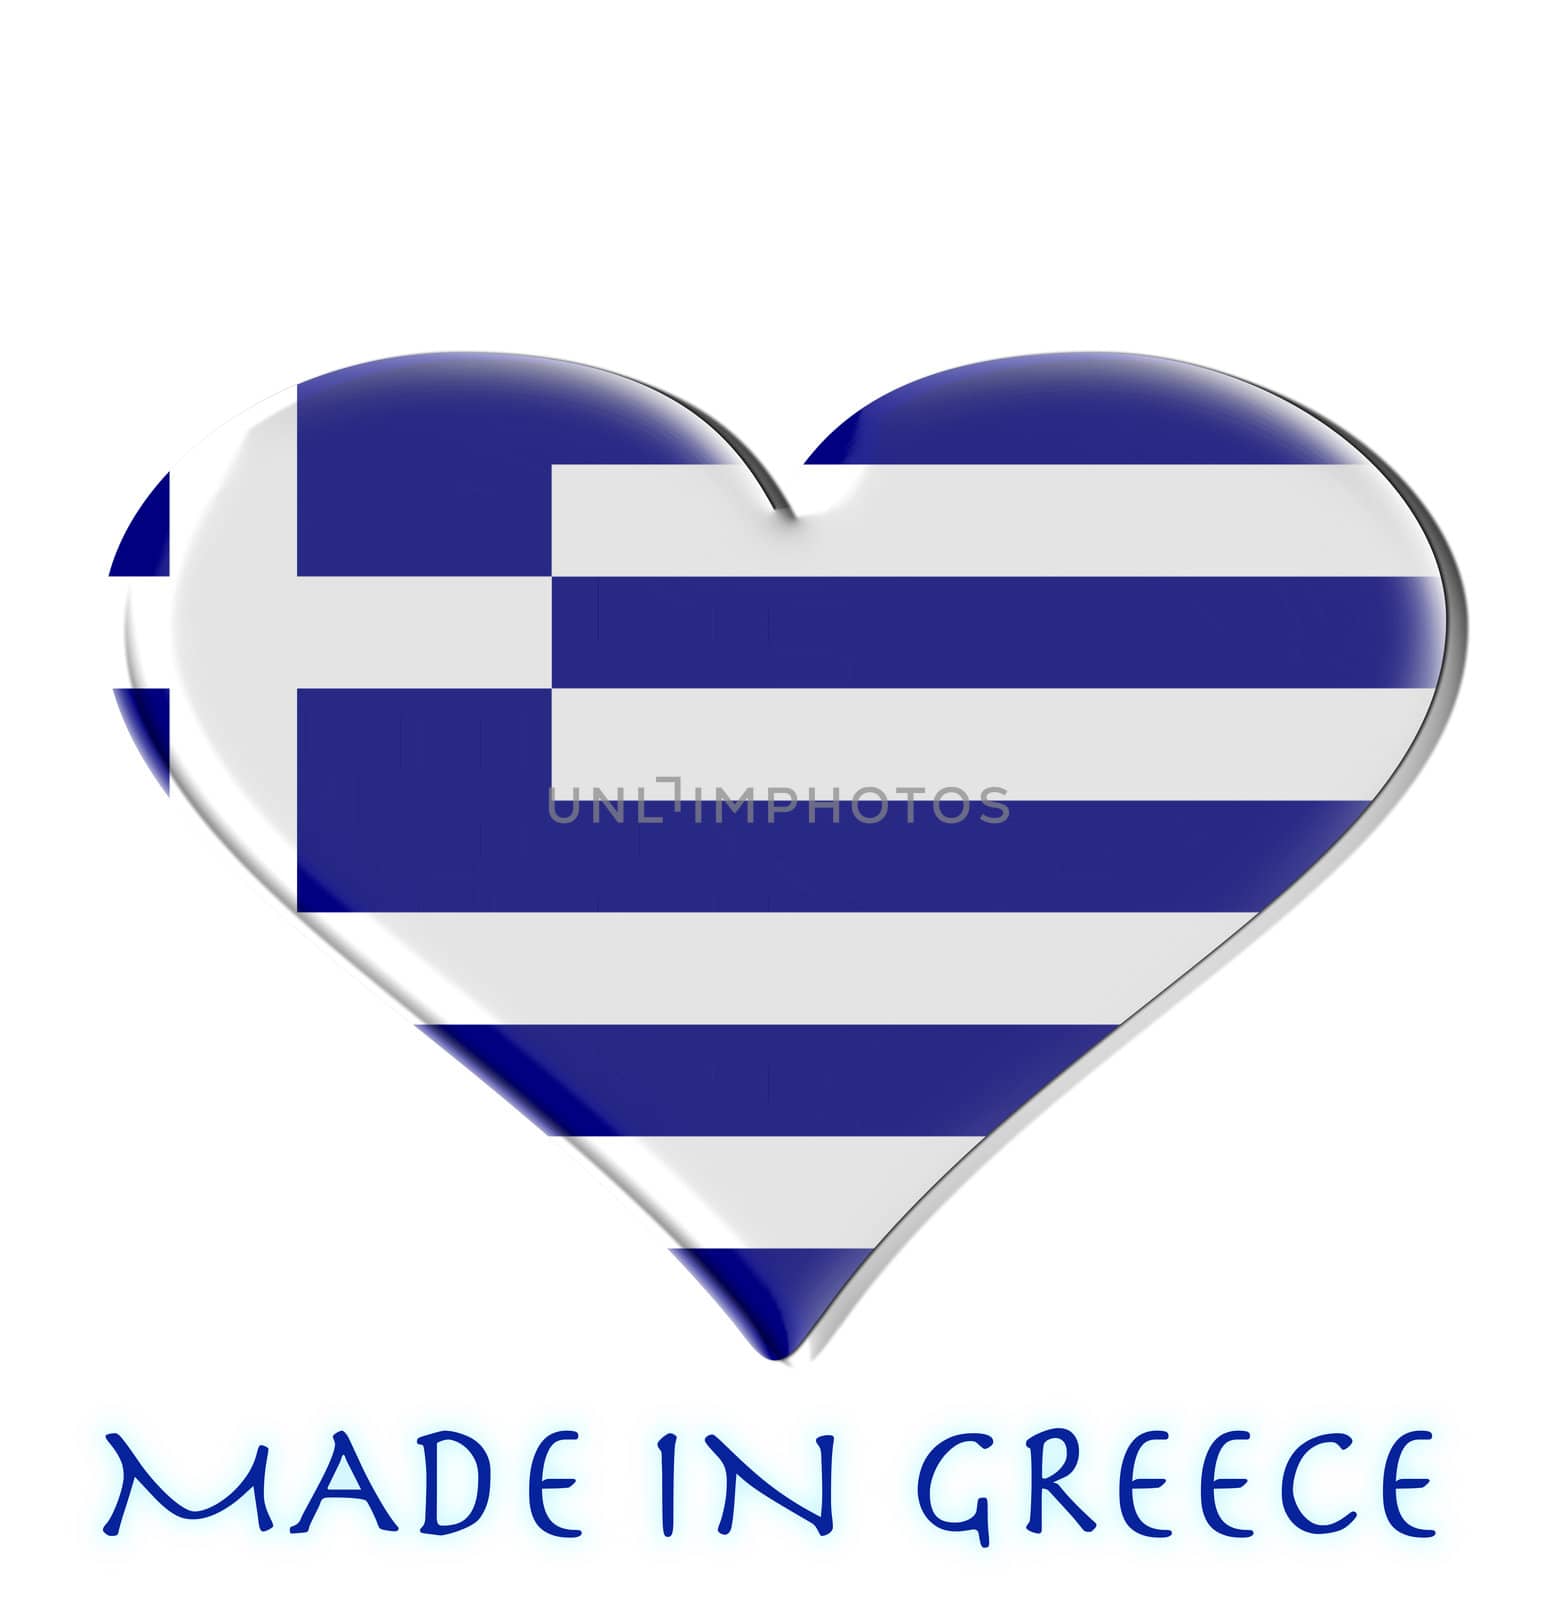 Made in Greece - an heart shaped flag